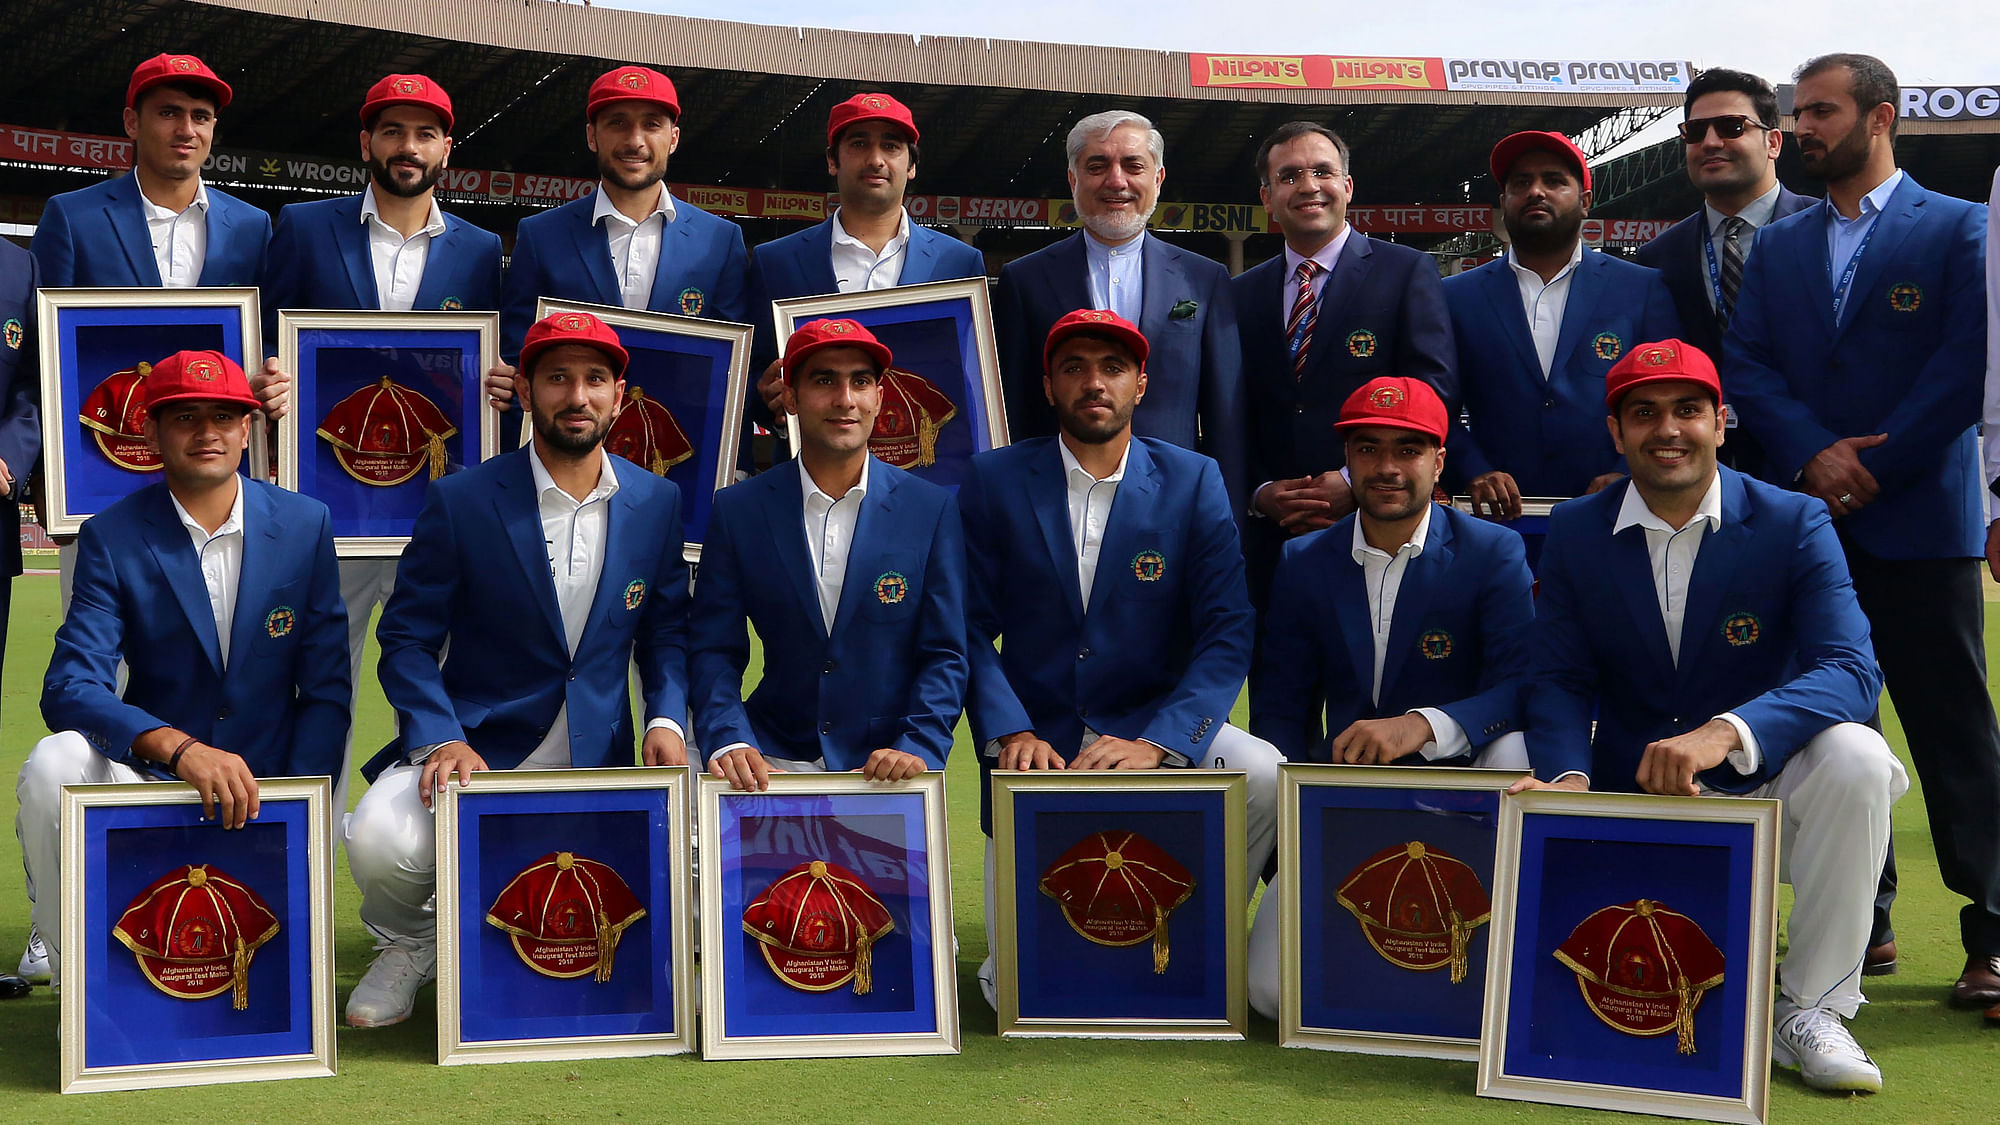 Afghanistan officially became the 12th Test cricketing country.